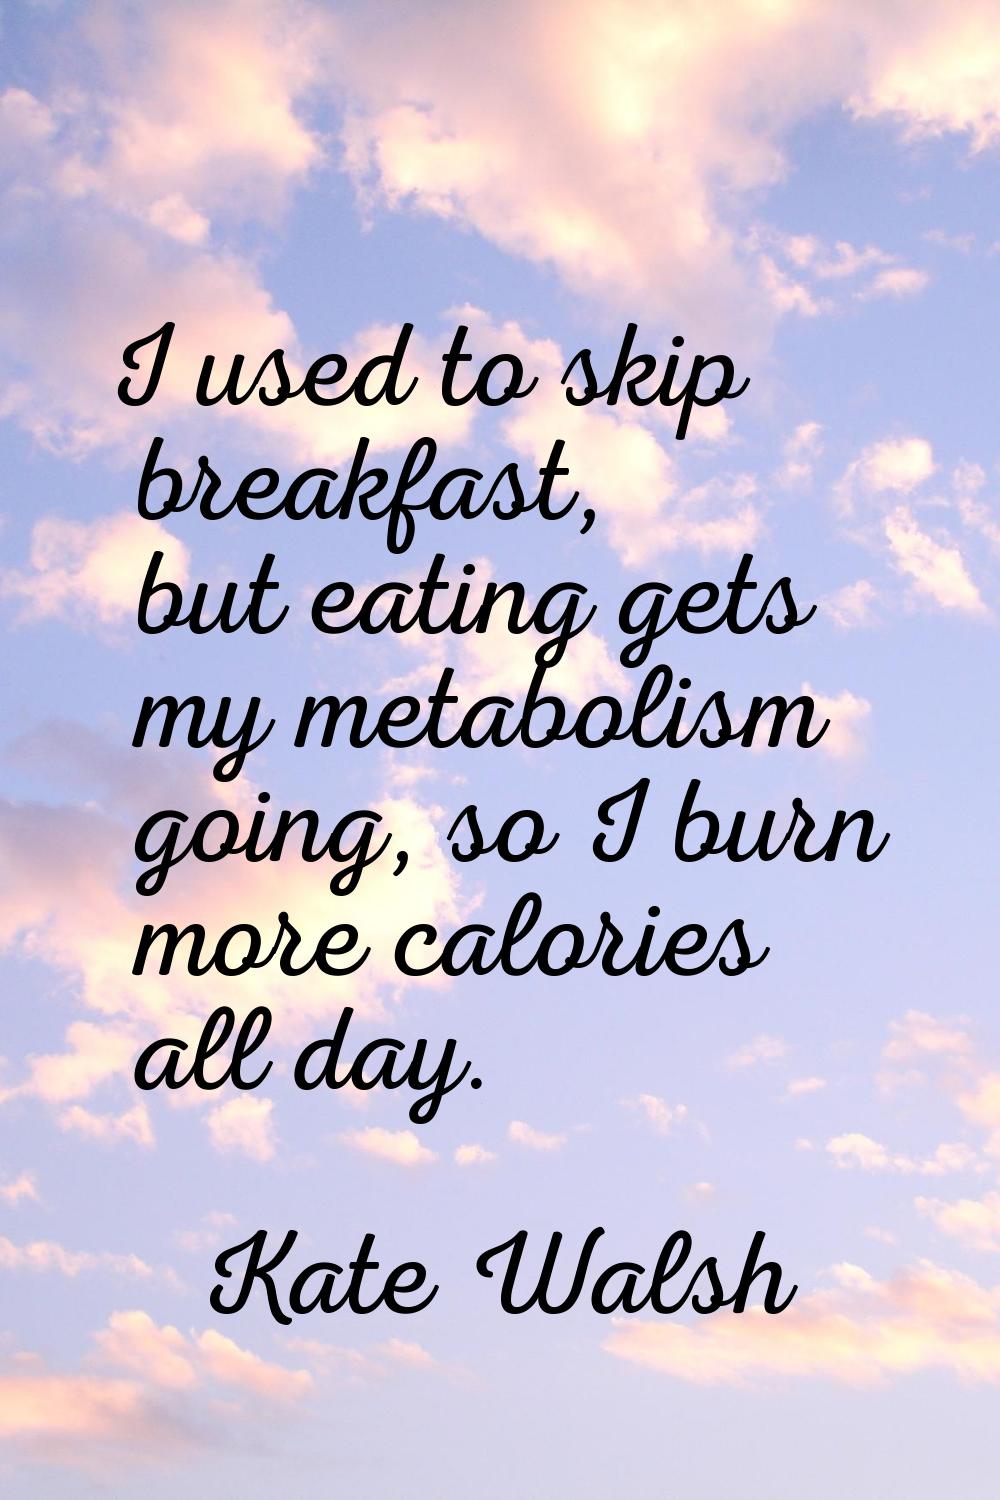 I used to skip breakfast, but eating gets my metabolism going, so I burn more calories all day.